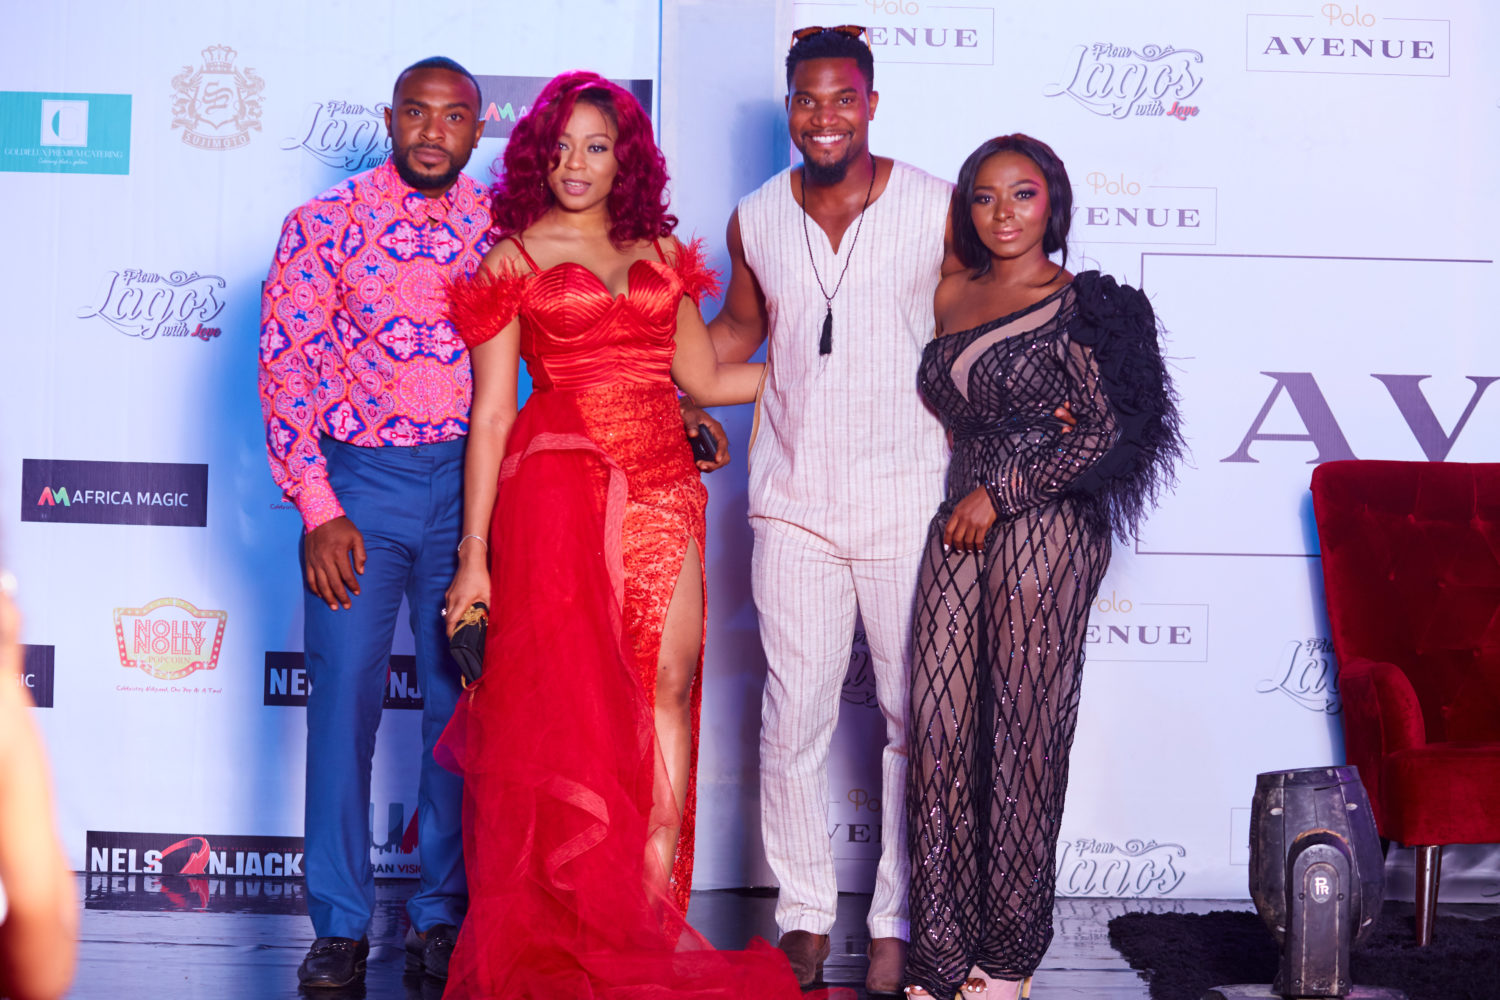 All the ‘From Lagos With Love’ Premiere Red Carpet Photos You Need to See